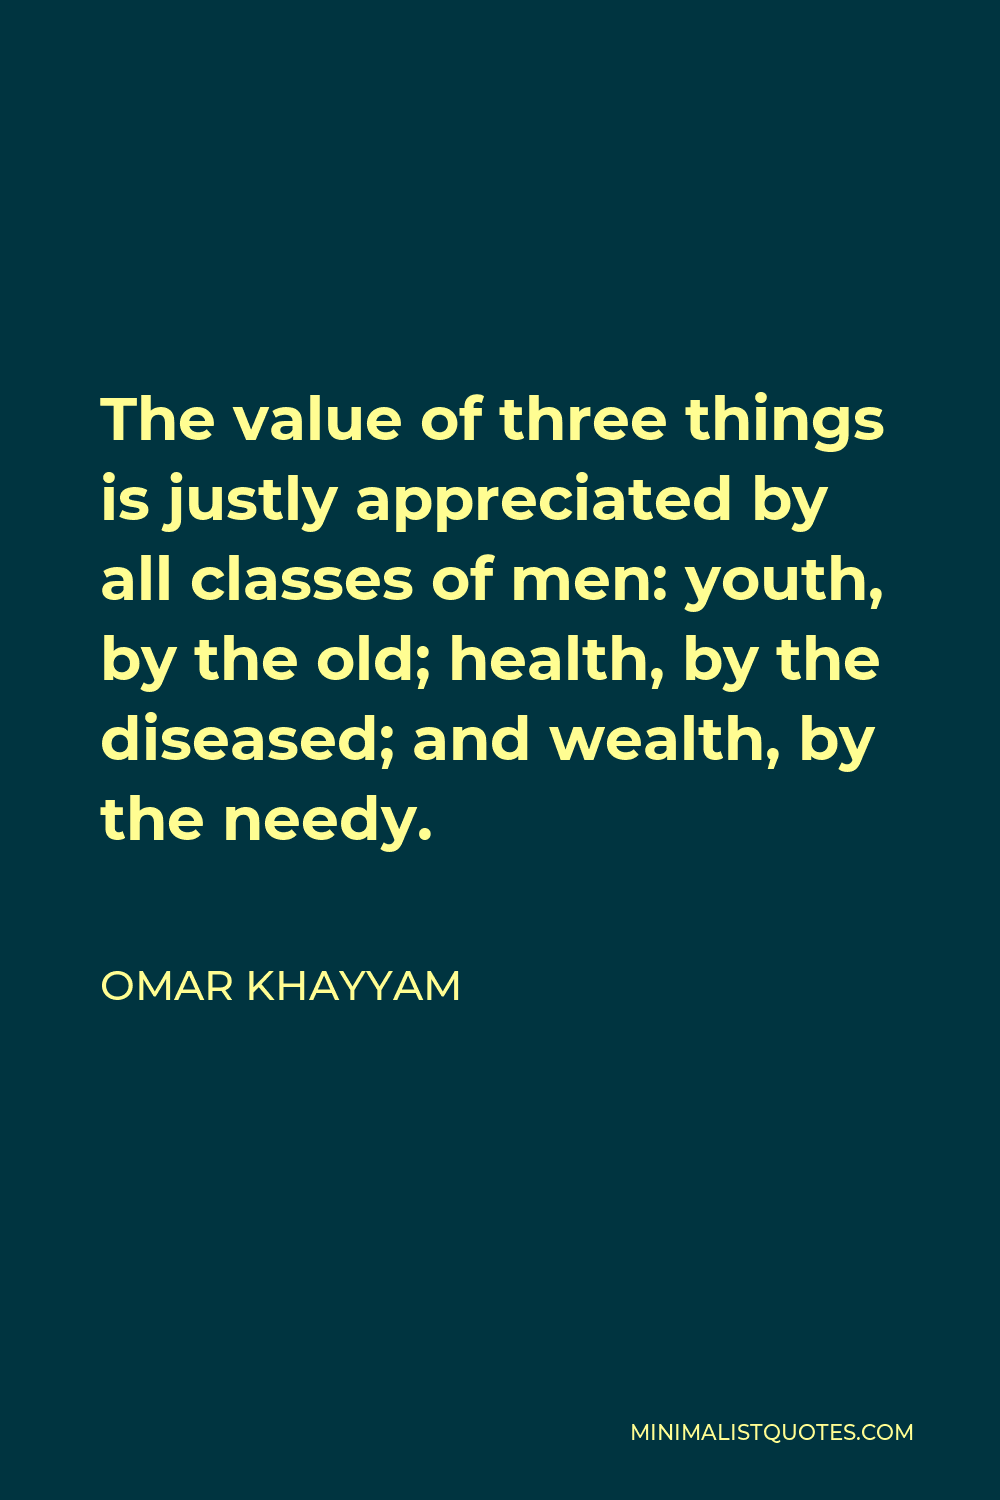 Omar Khayyam Quote - The value of three things is justly appreciated by all classes of men: youth, by the old; health, by the diseased; and wealth, by the needy.